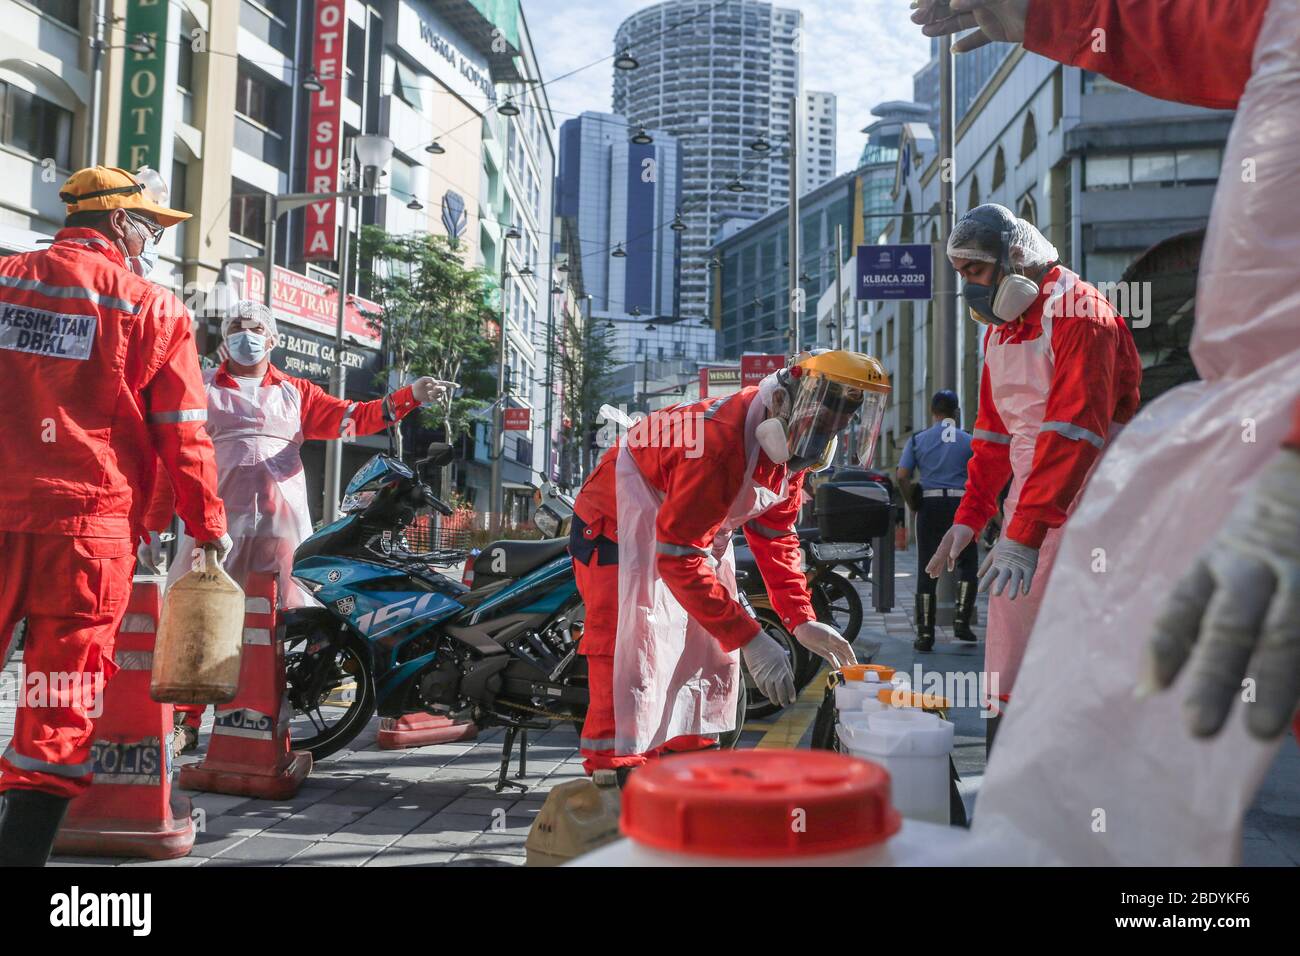 Kuala Lumpur, Malaysia. 08th Apr, 2020. Operation of disinfection in the street in Sri Petaling, Kuala Lumpur, Malaysia. About 62% of Covid-19 cases were linked to the cluster from the Tabligh event at the Sri Petaling mosque, says Health director-general Noor Hisham Abdullah. Malaysia on Friday (Apr 10) reported 118 new COVID-19 cases, bringing the national tally to 4,346. (Photo by Zulfadhli Zaki/Pacific Press/Sipa USA) Credit: Sipa USA/Alamy Live News Stock Photo